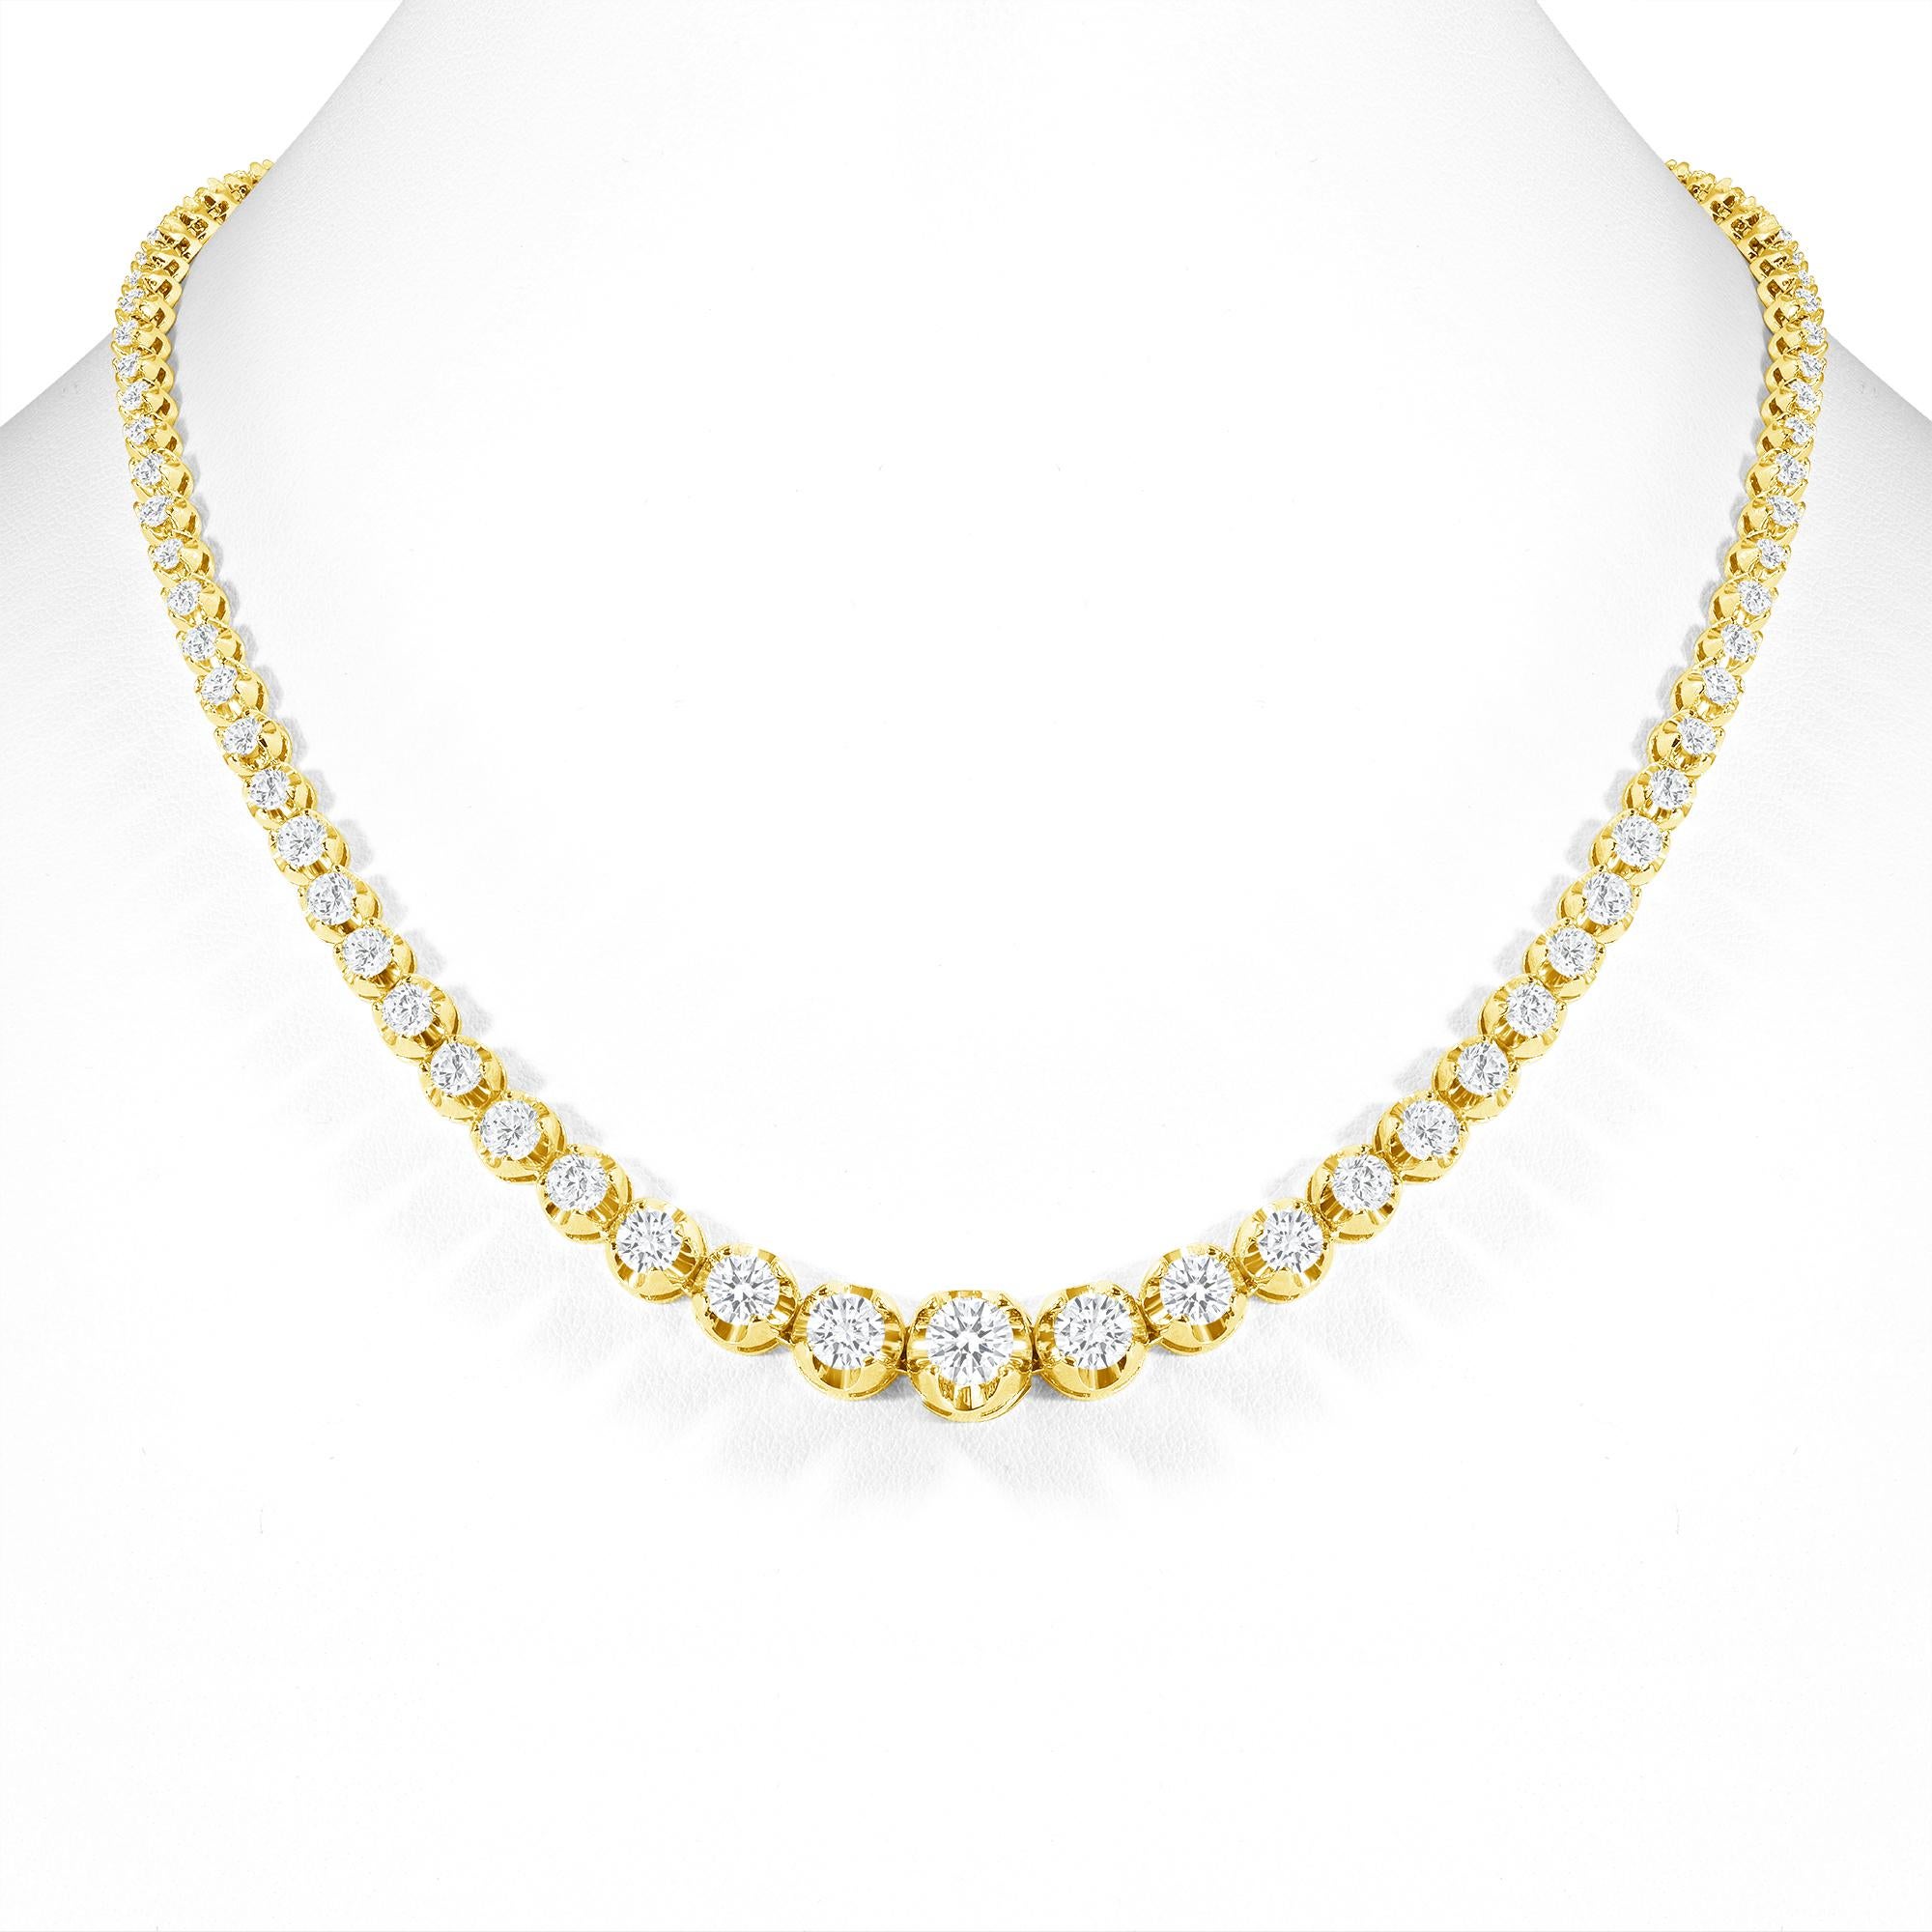 This finely made graduated necklace with beautiful round diamonds sits elegantly on any neck. 

Metal: 14k Gold
Diamond Cut: Round
Total Diamond Approx. Carats:  10ct
Diamond Clarity: VS
Diamond Color: F-G
Size: 20 inches
Color: Yellow Gold
Included